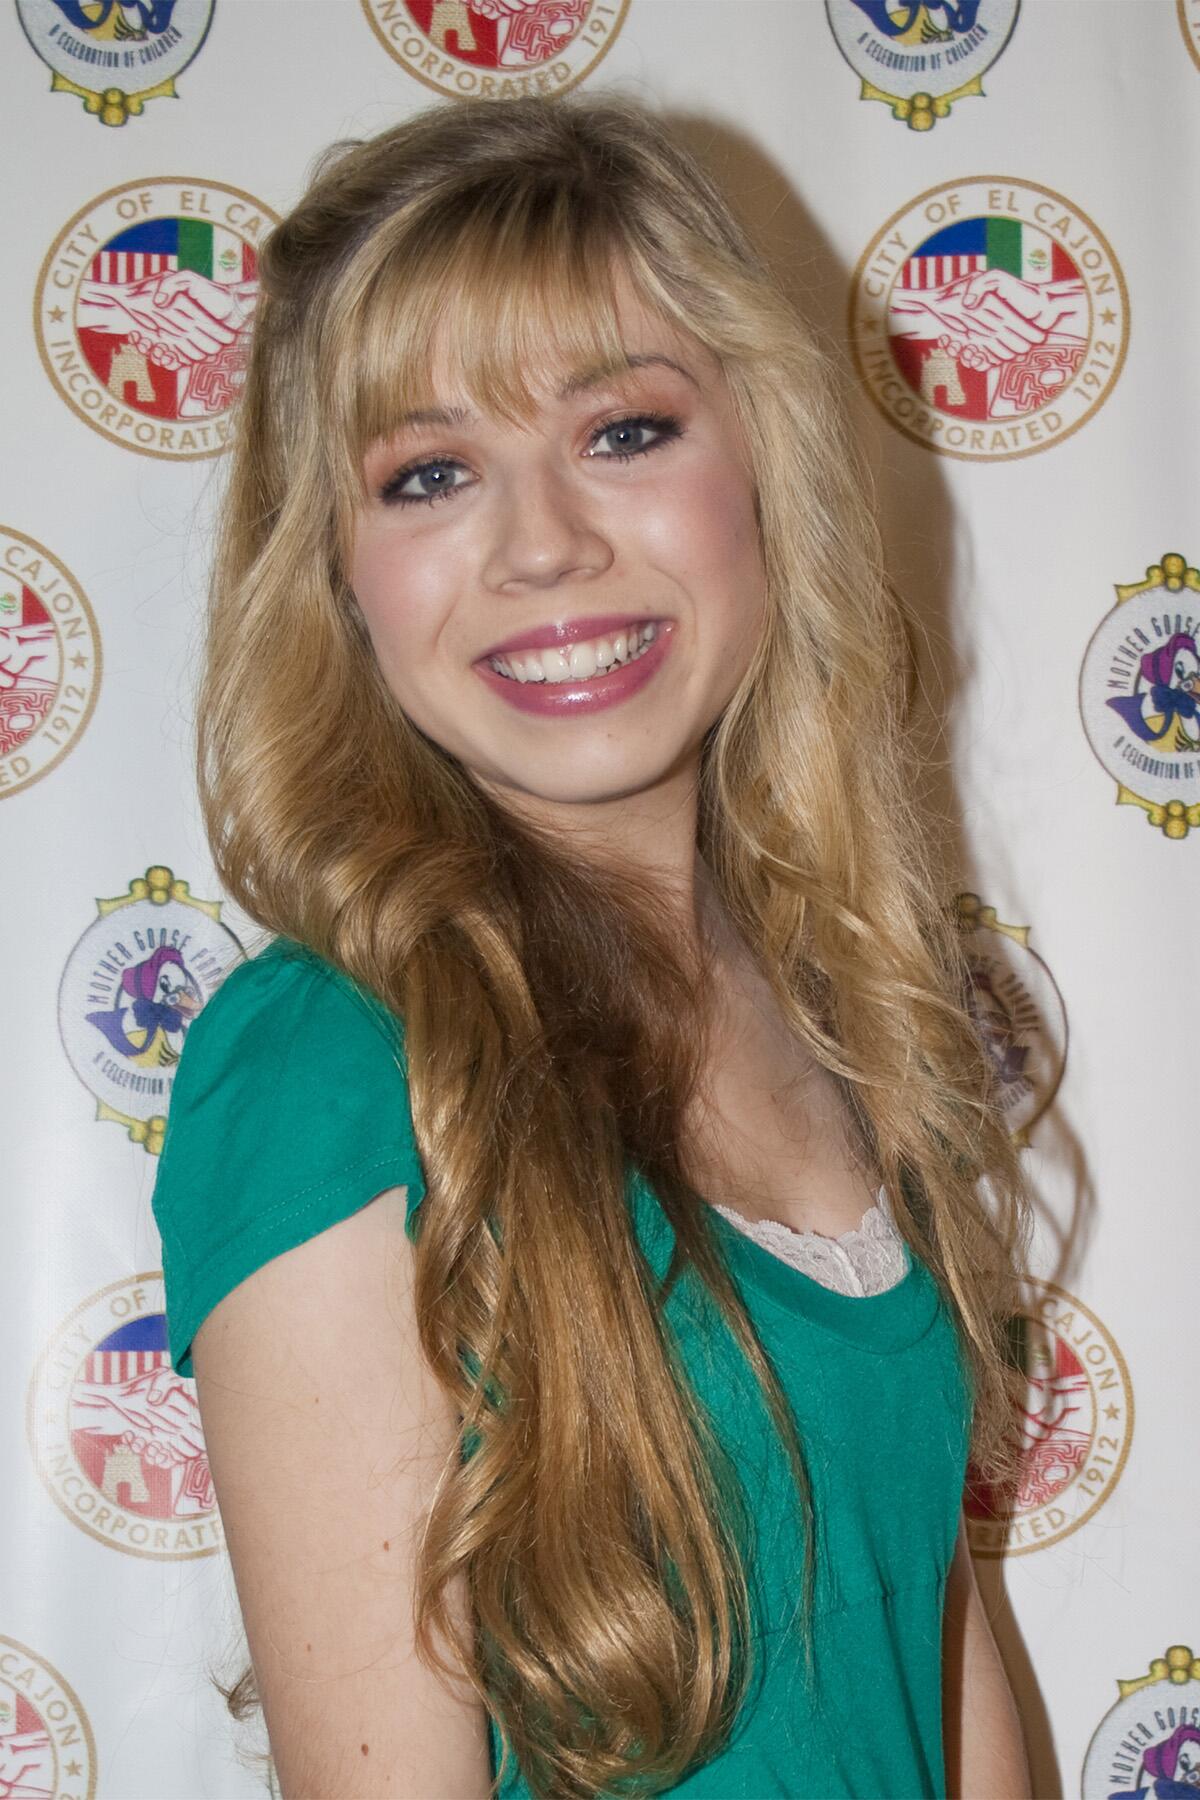 Jennette McCurdy of iCarly Fame Details Abuse in Hollywood Memoir 